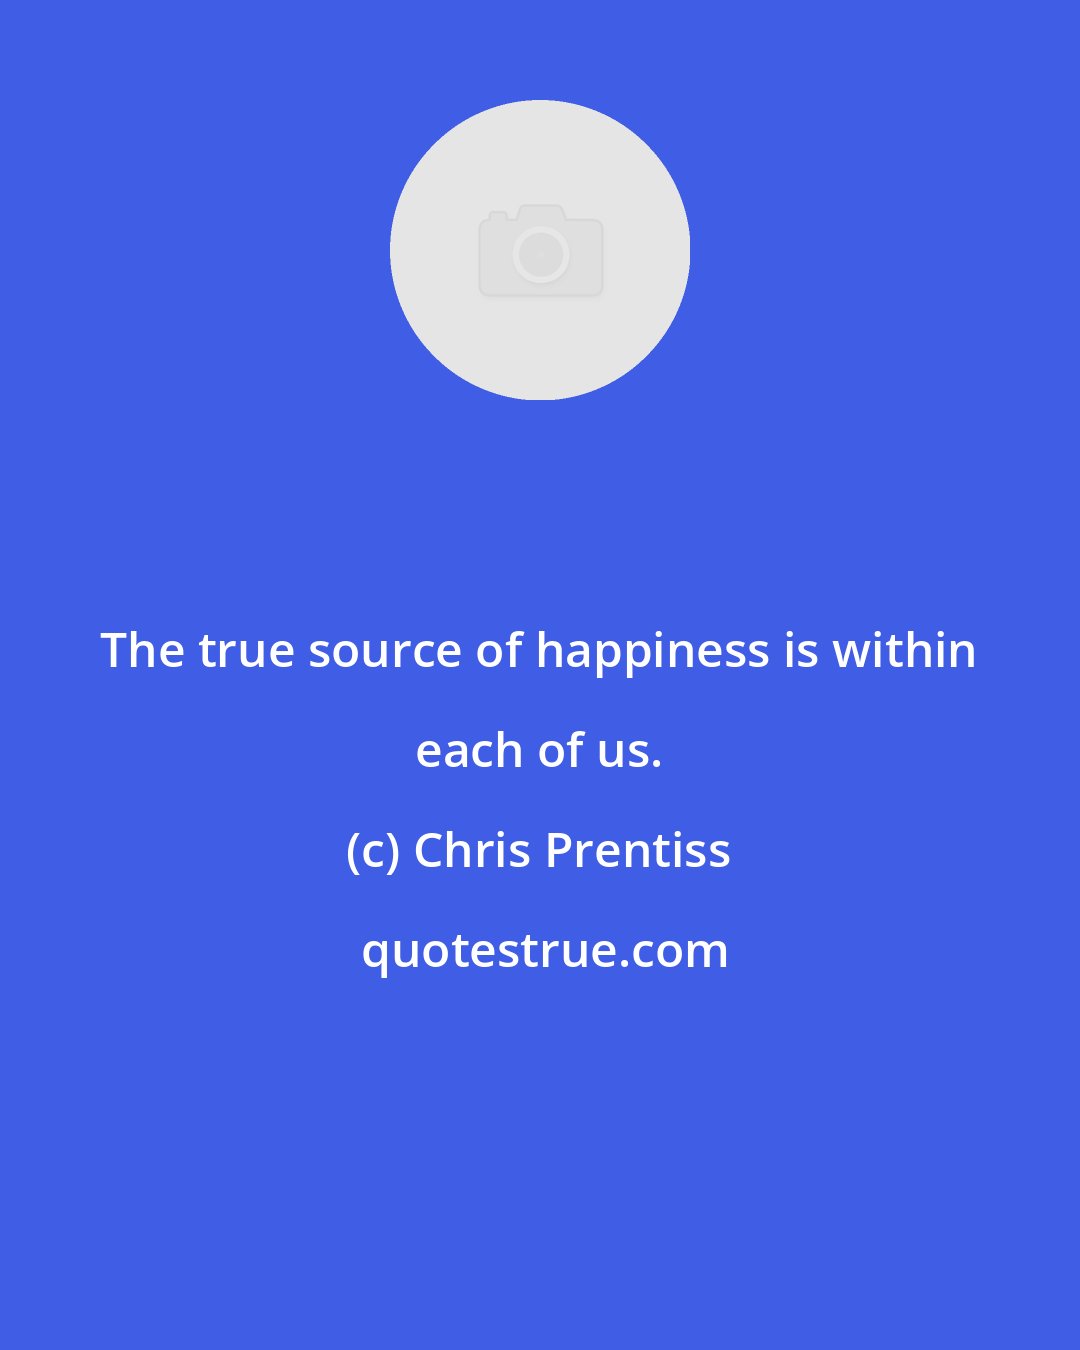 Chris Prentiss: The true source of happiness is within each of us.